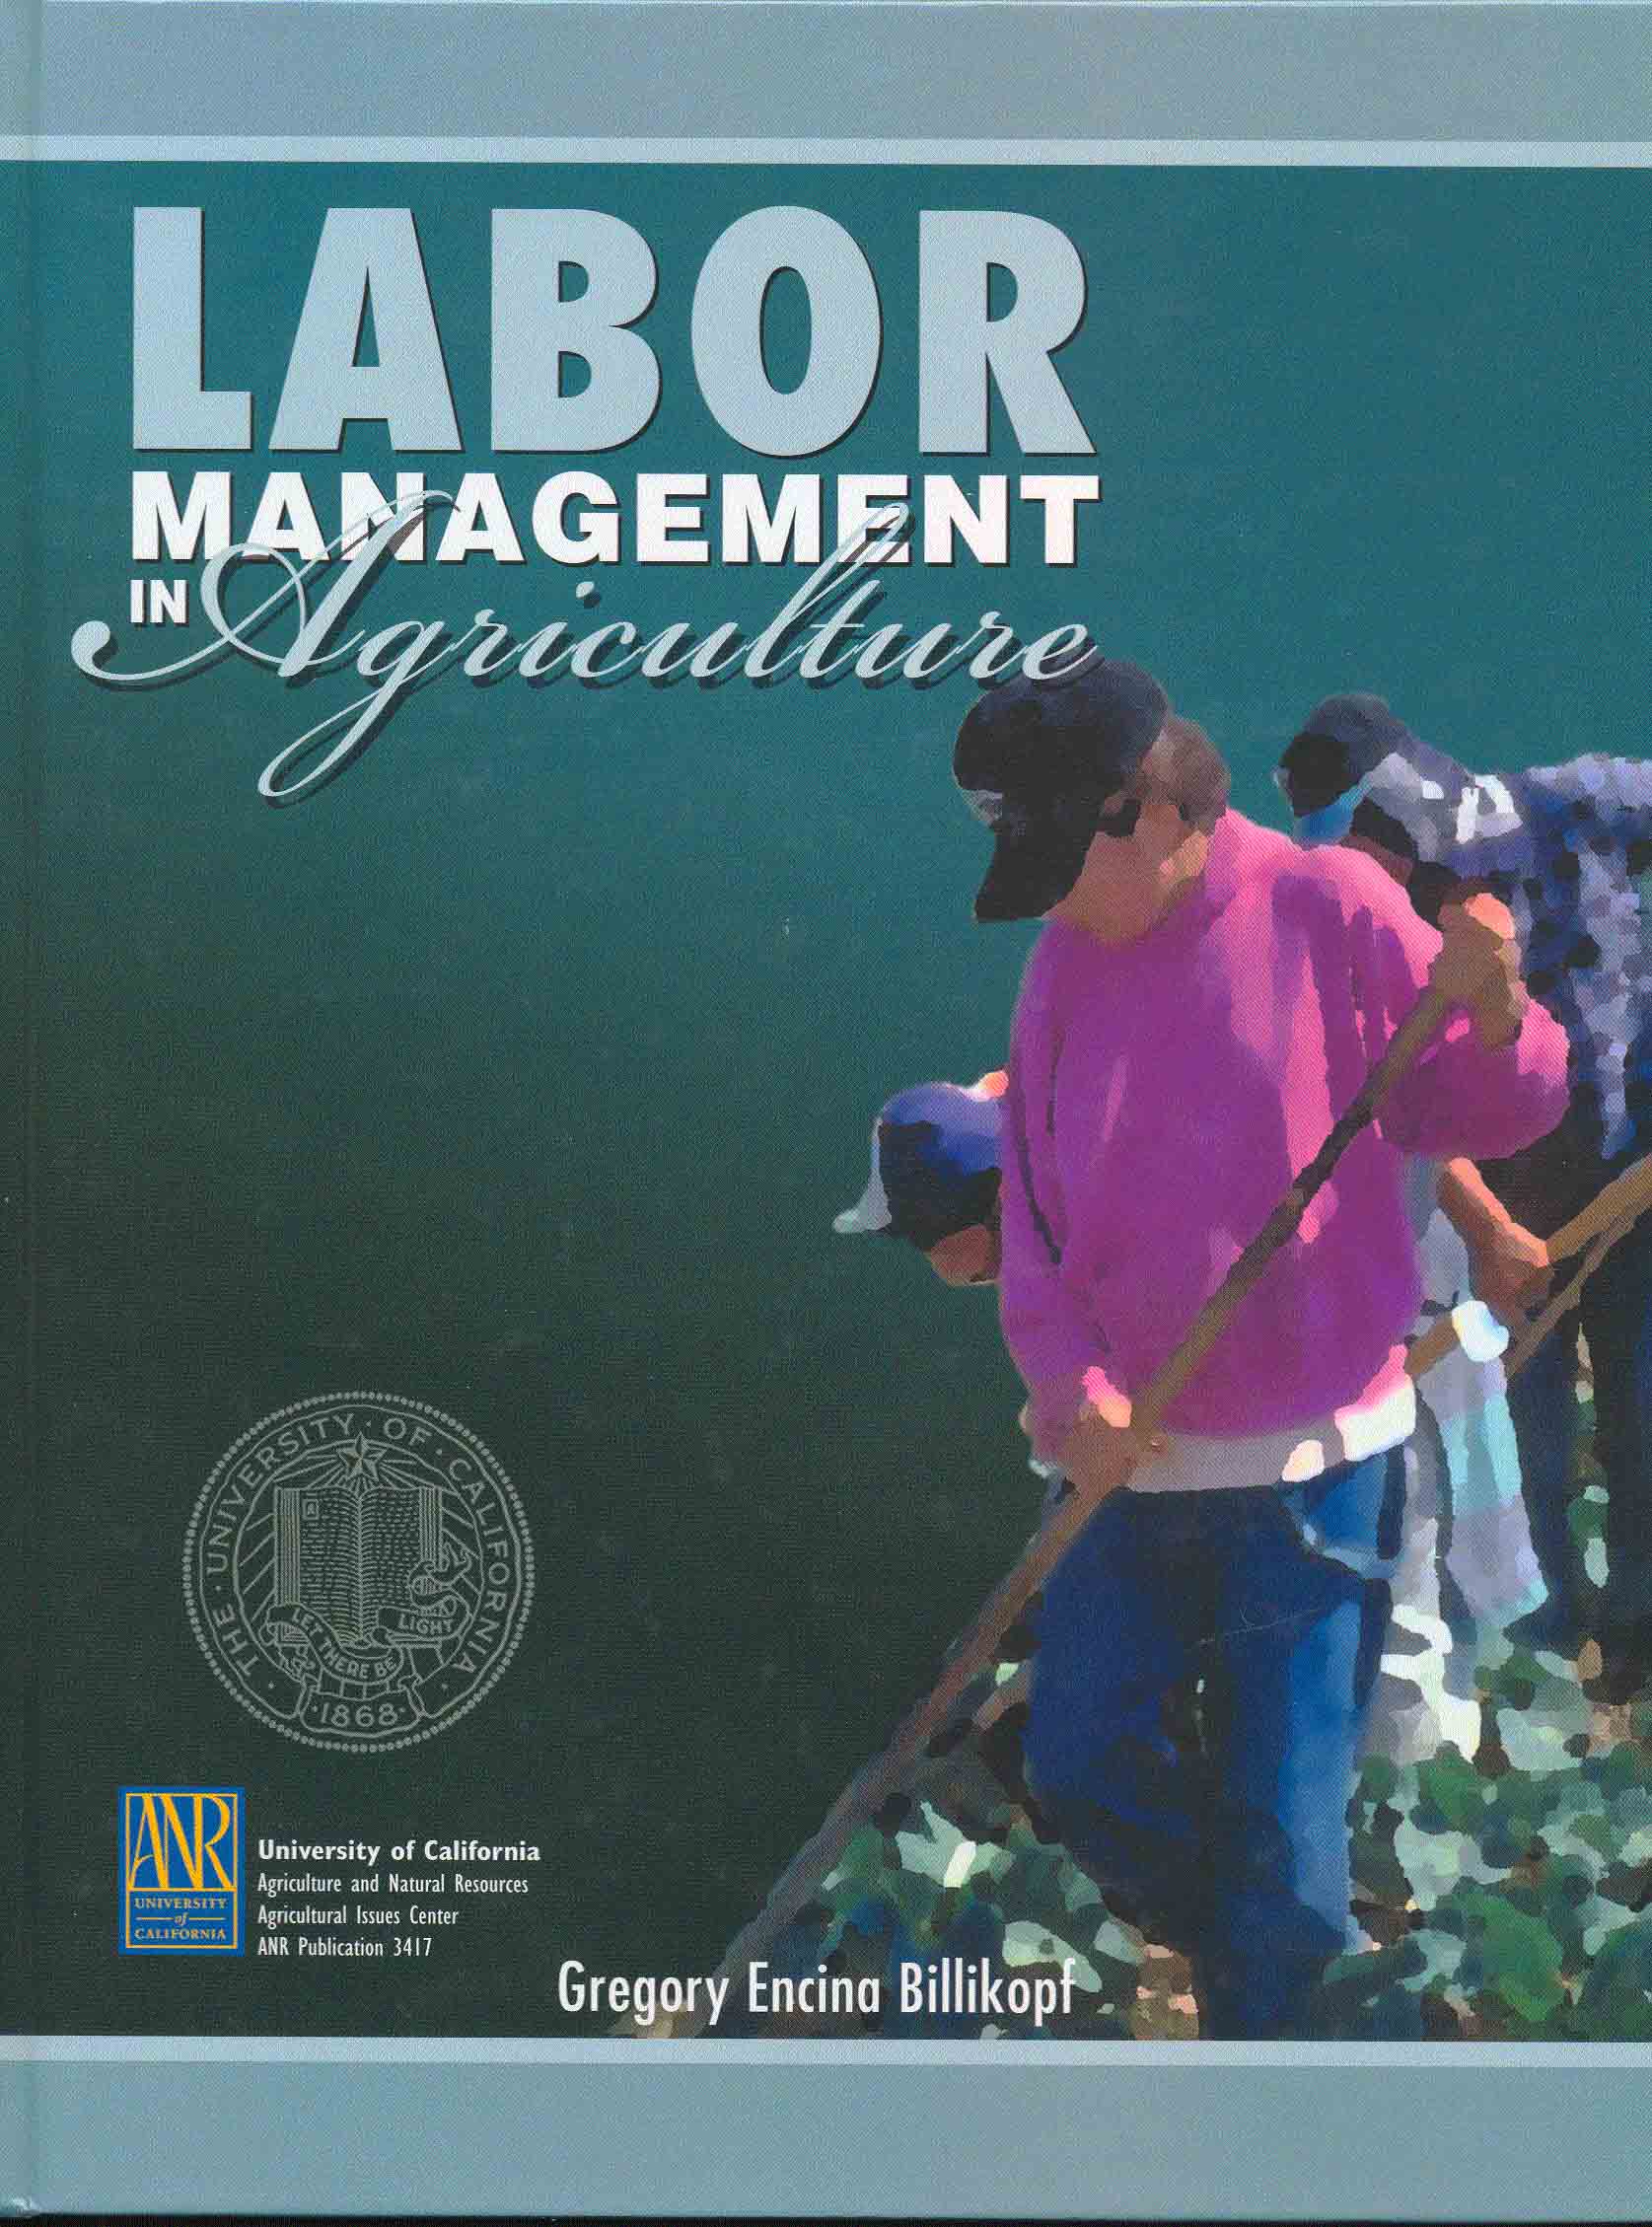 Labor Management in Agriculture: Cultivating Personnel Productivity